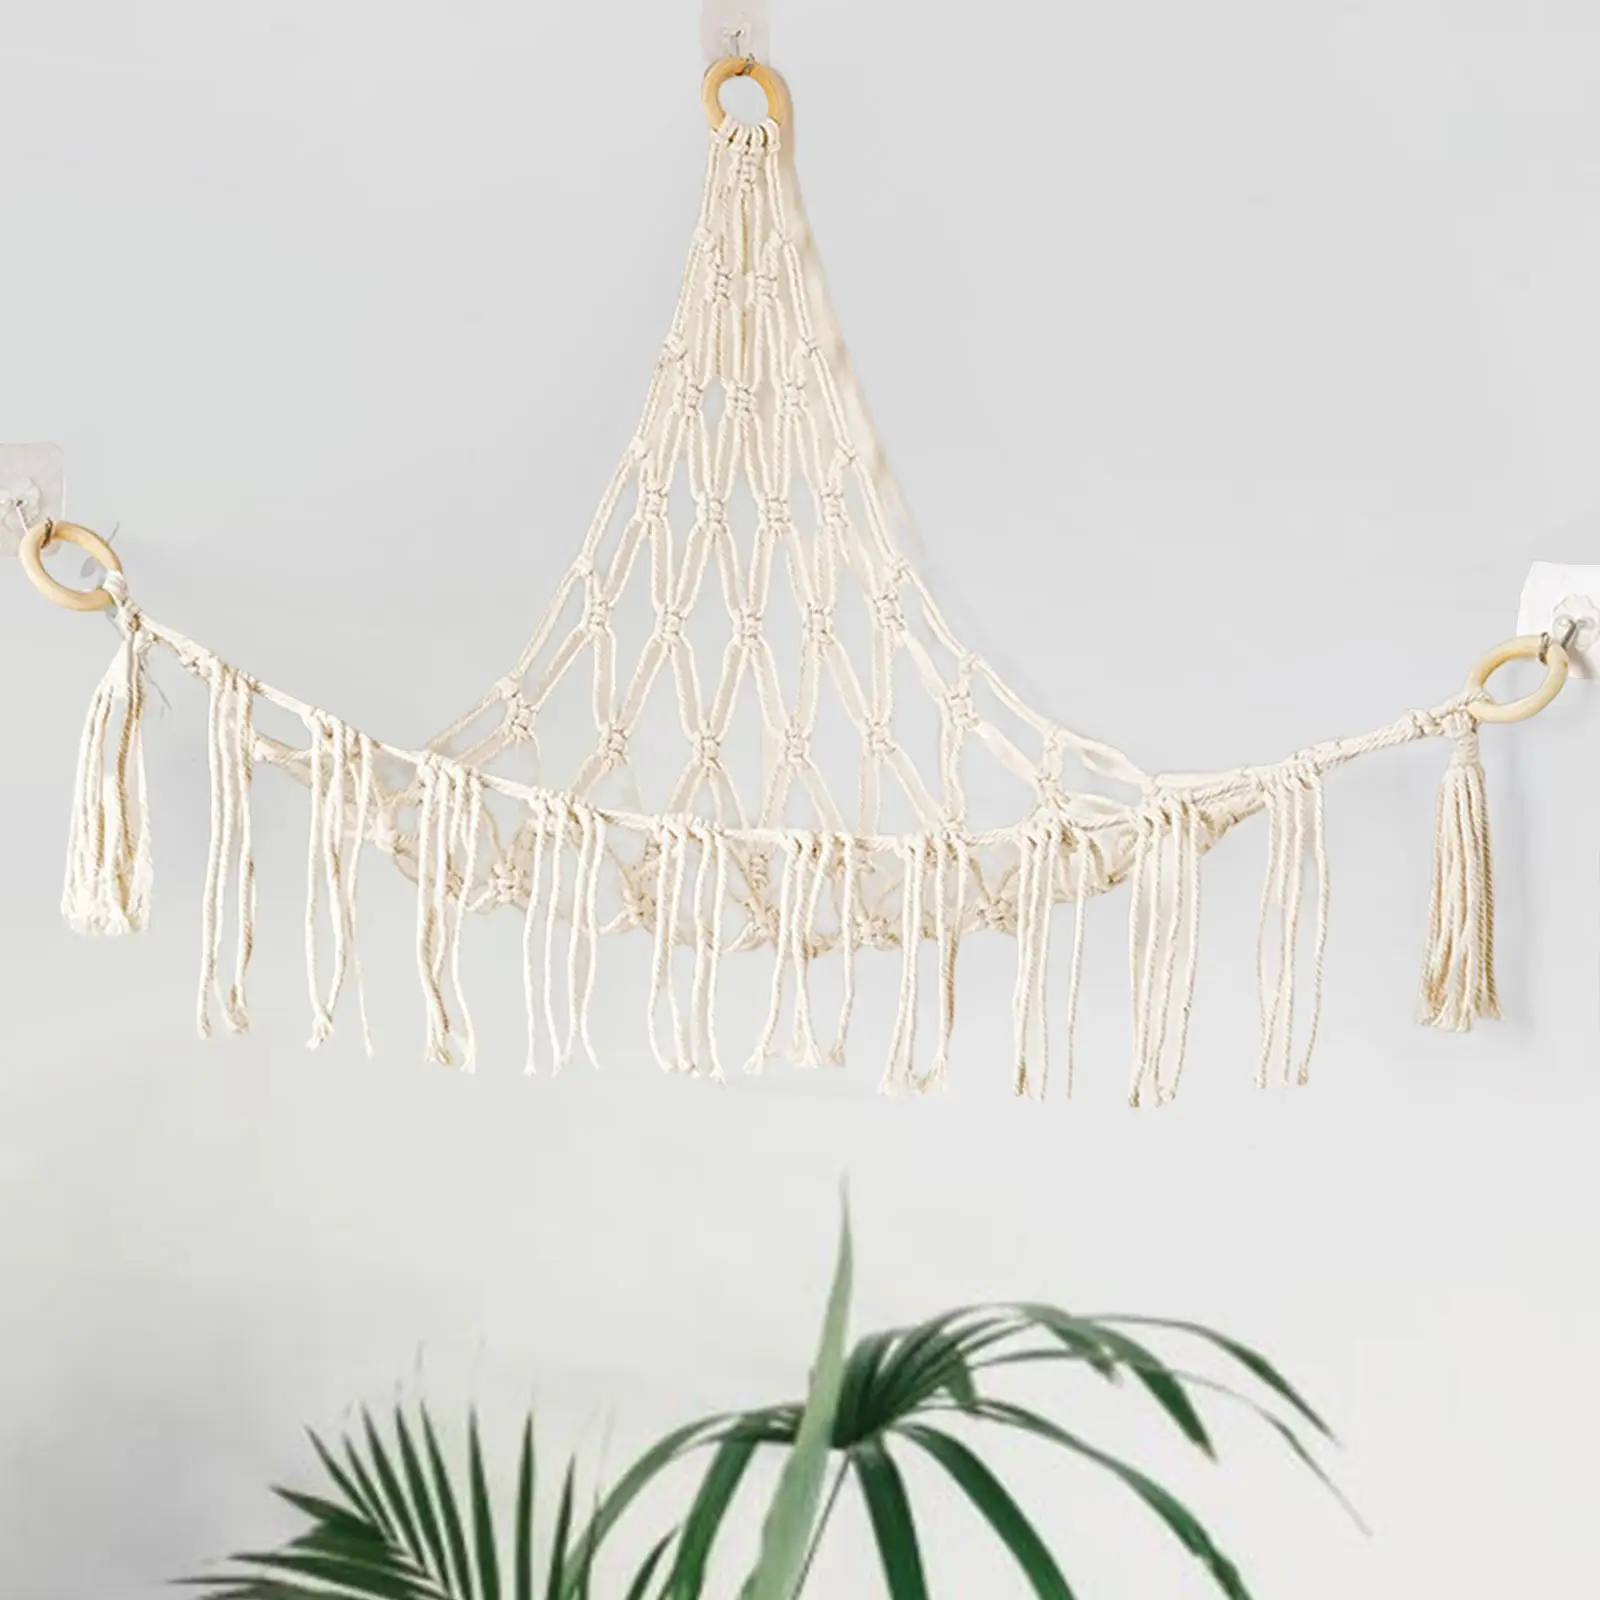 Toy Hammock Holder Hanging Macrame Stuff Display Soft Stuffed Toy Storage Net for Home Bedroom Ornaments Decor Holiday Gifts